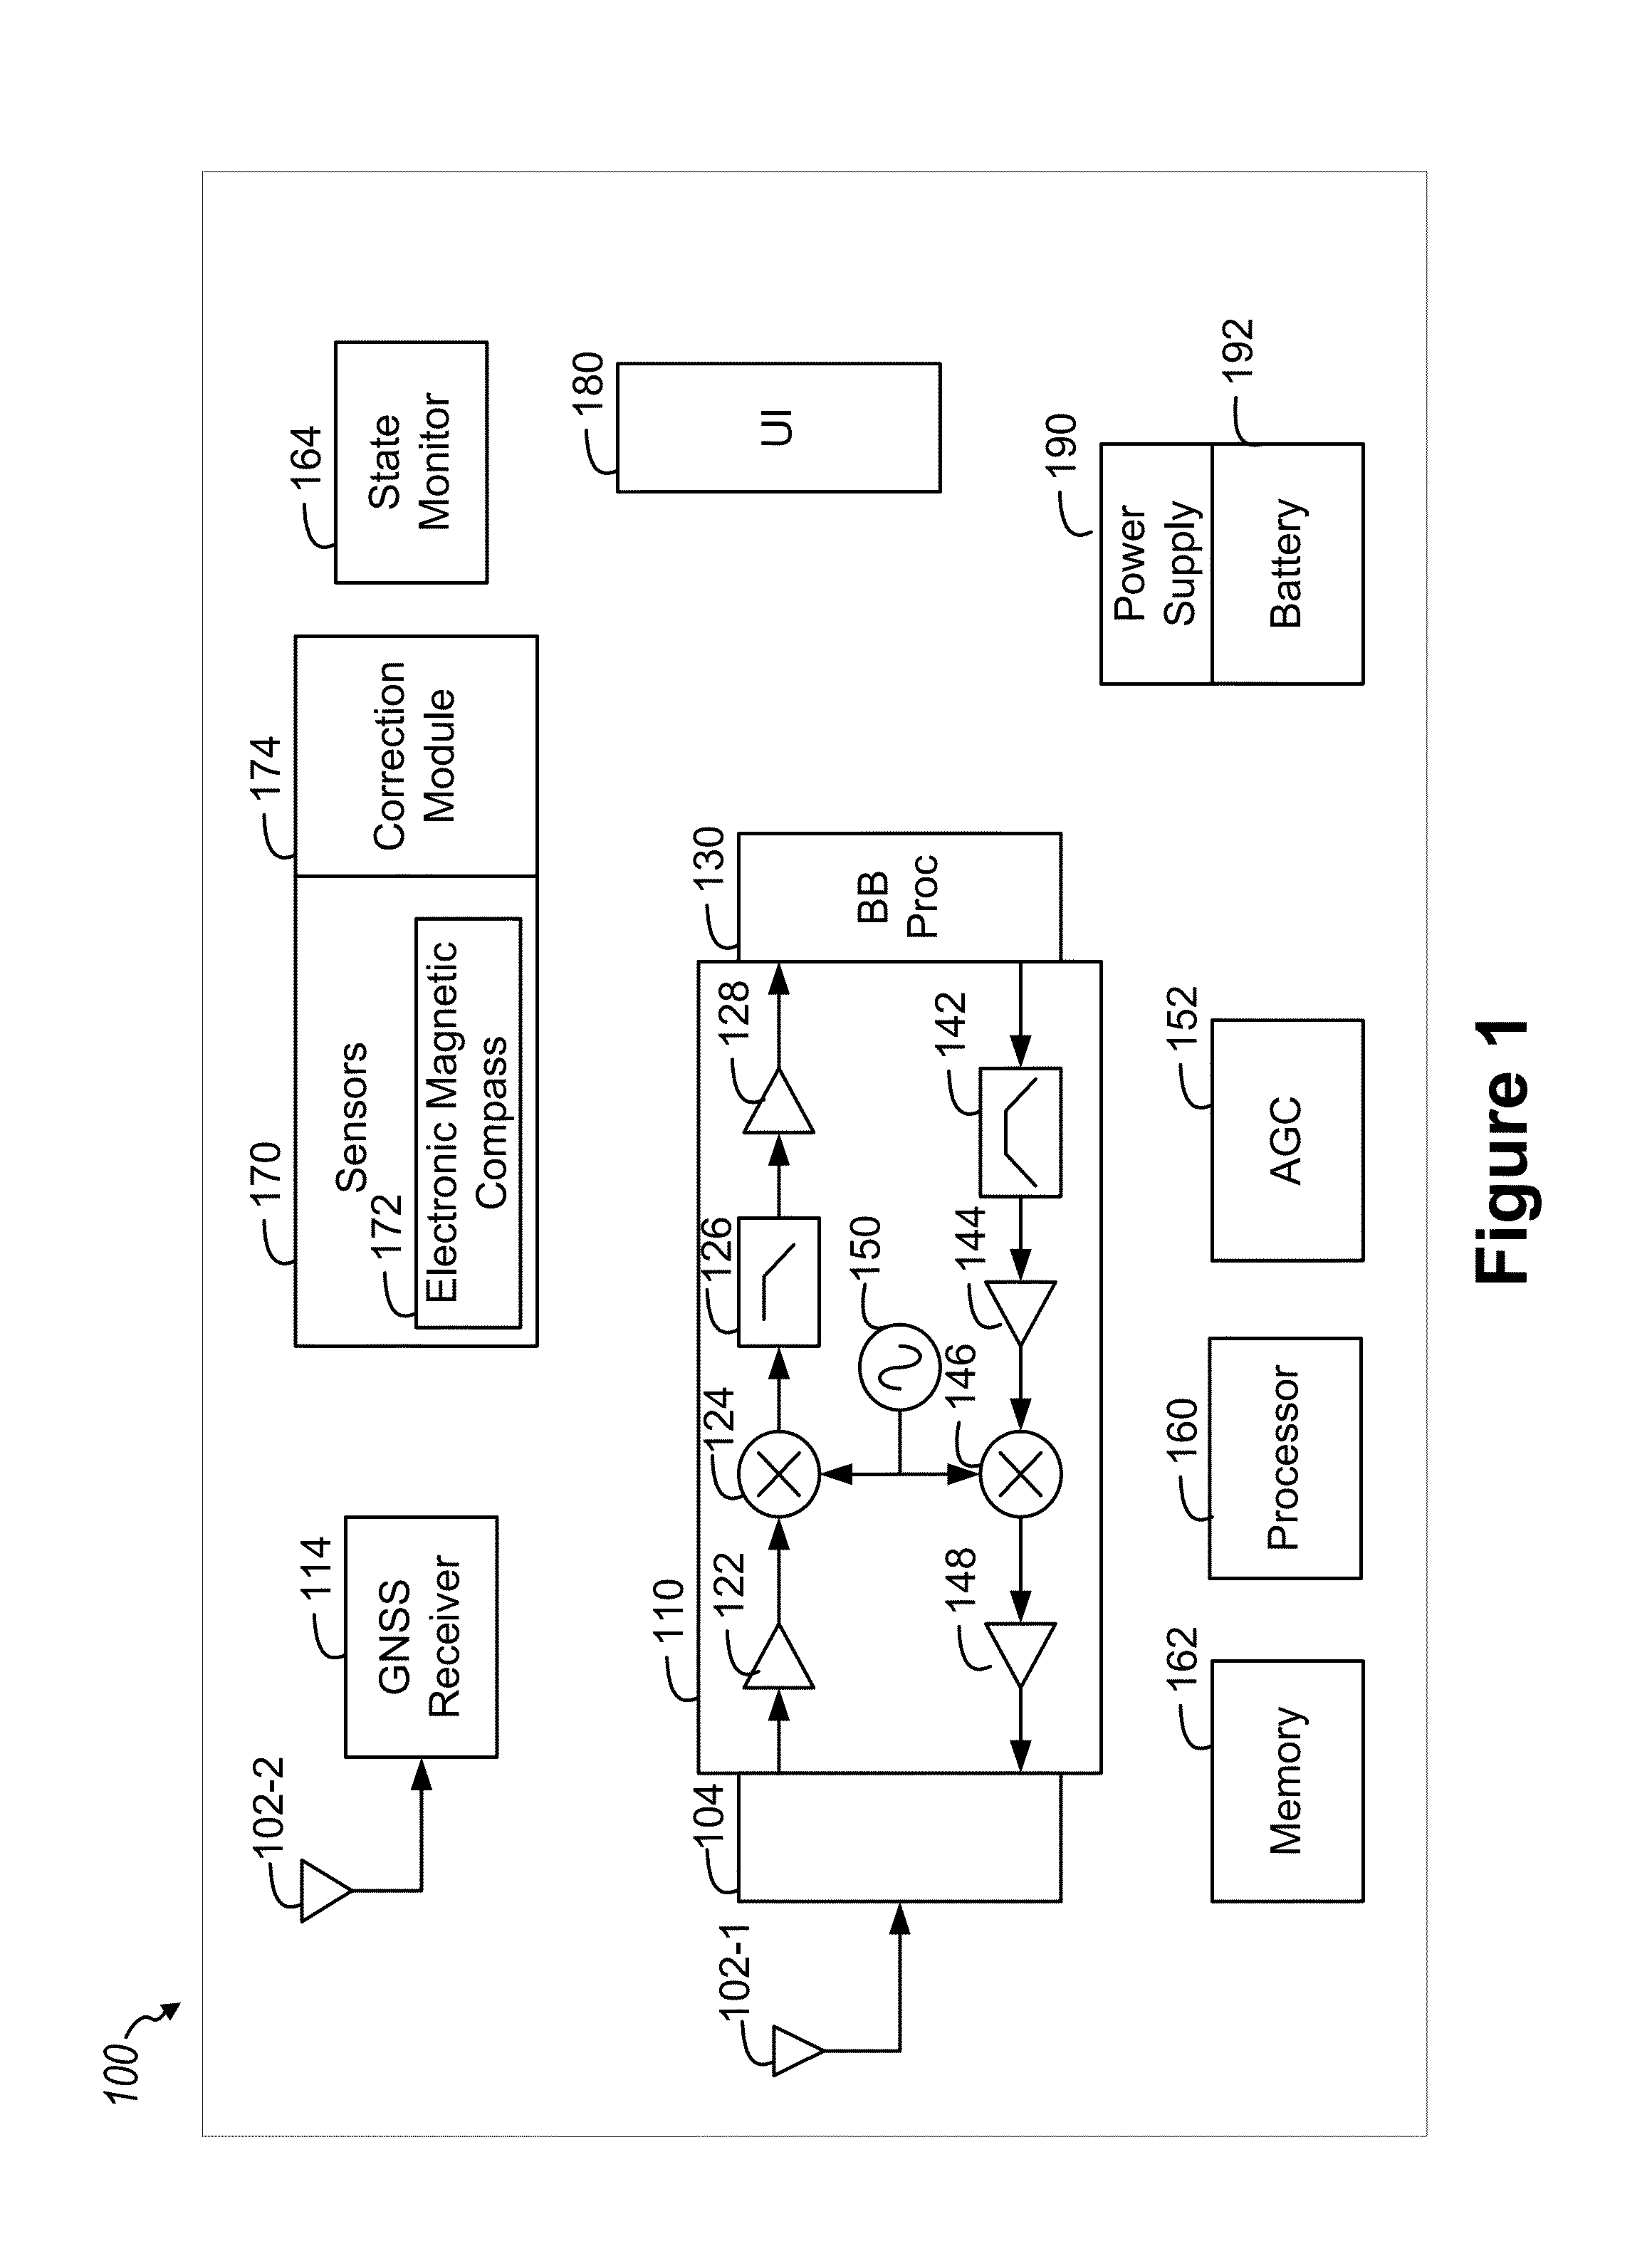 Accurate magnetic compass in mobile electronic device